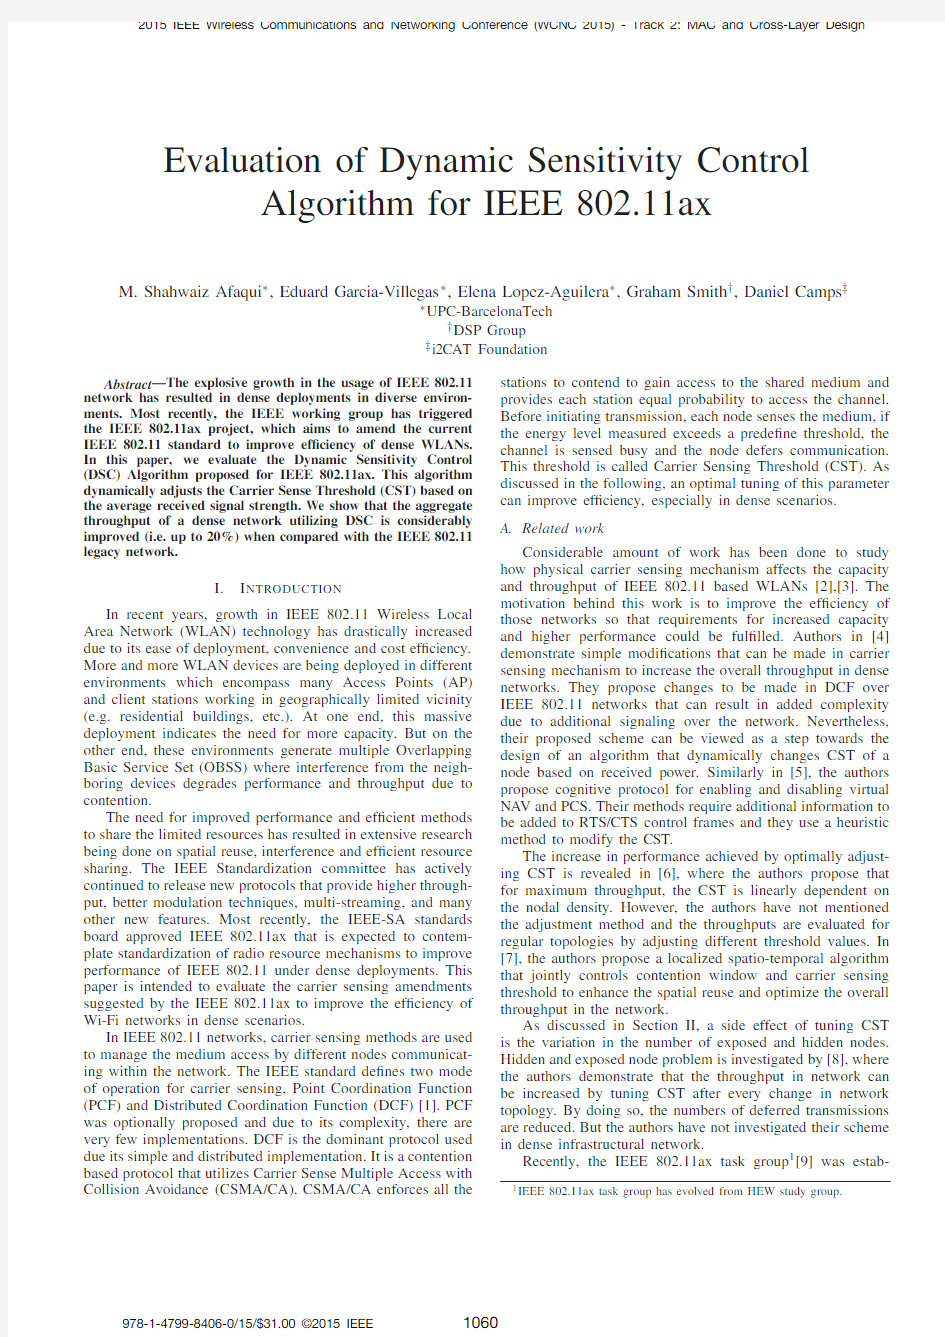 Evaluation of dynamic sensitivity control algorithm for IEEE 802.11ax